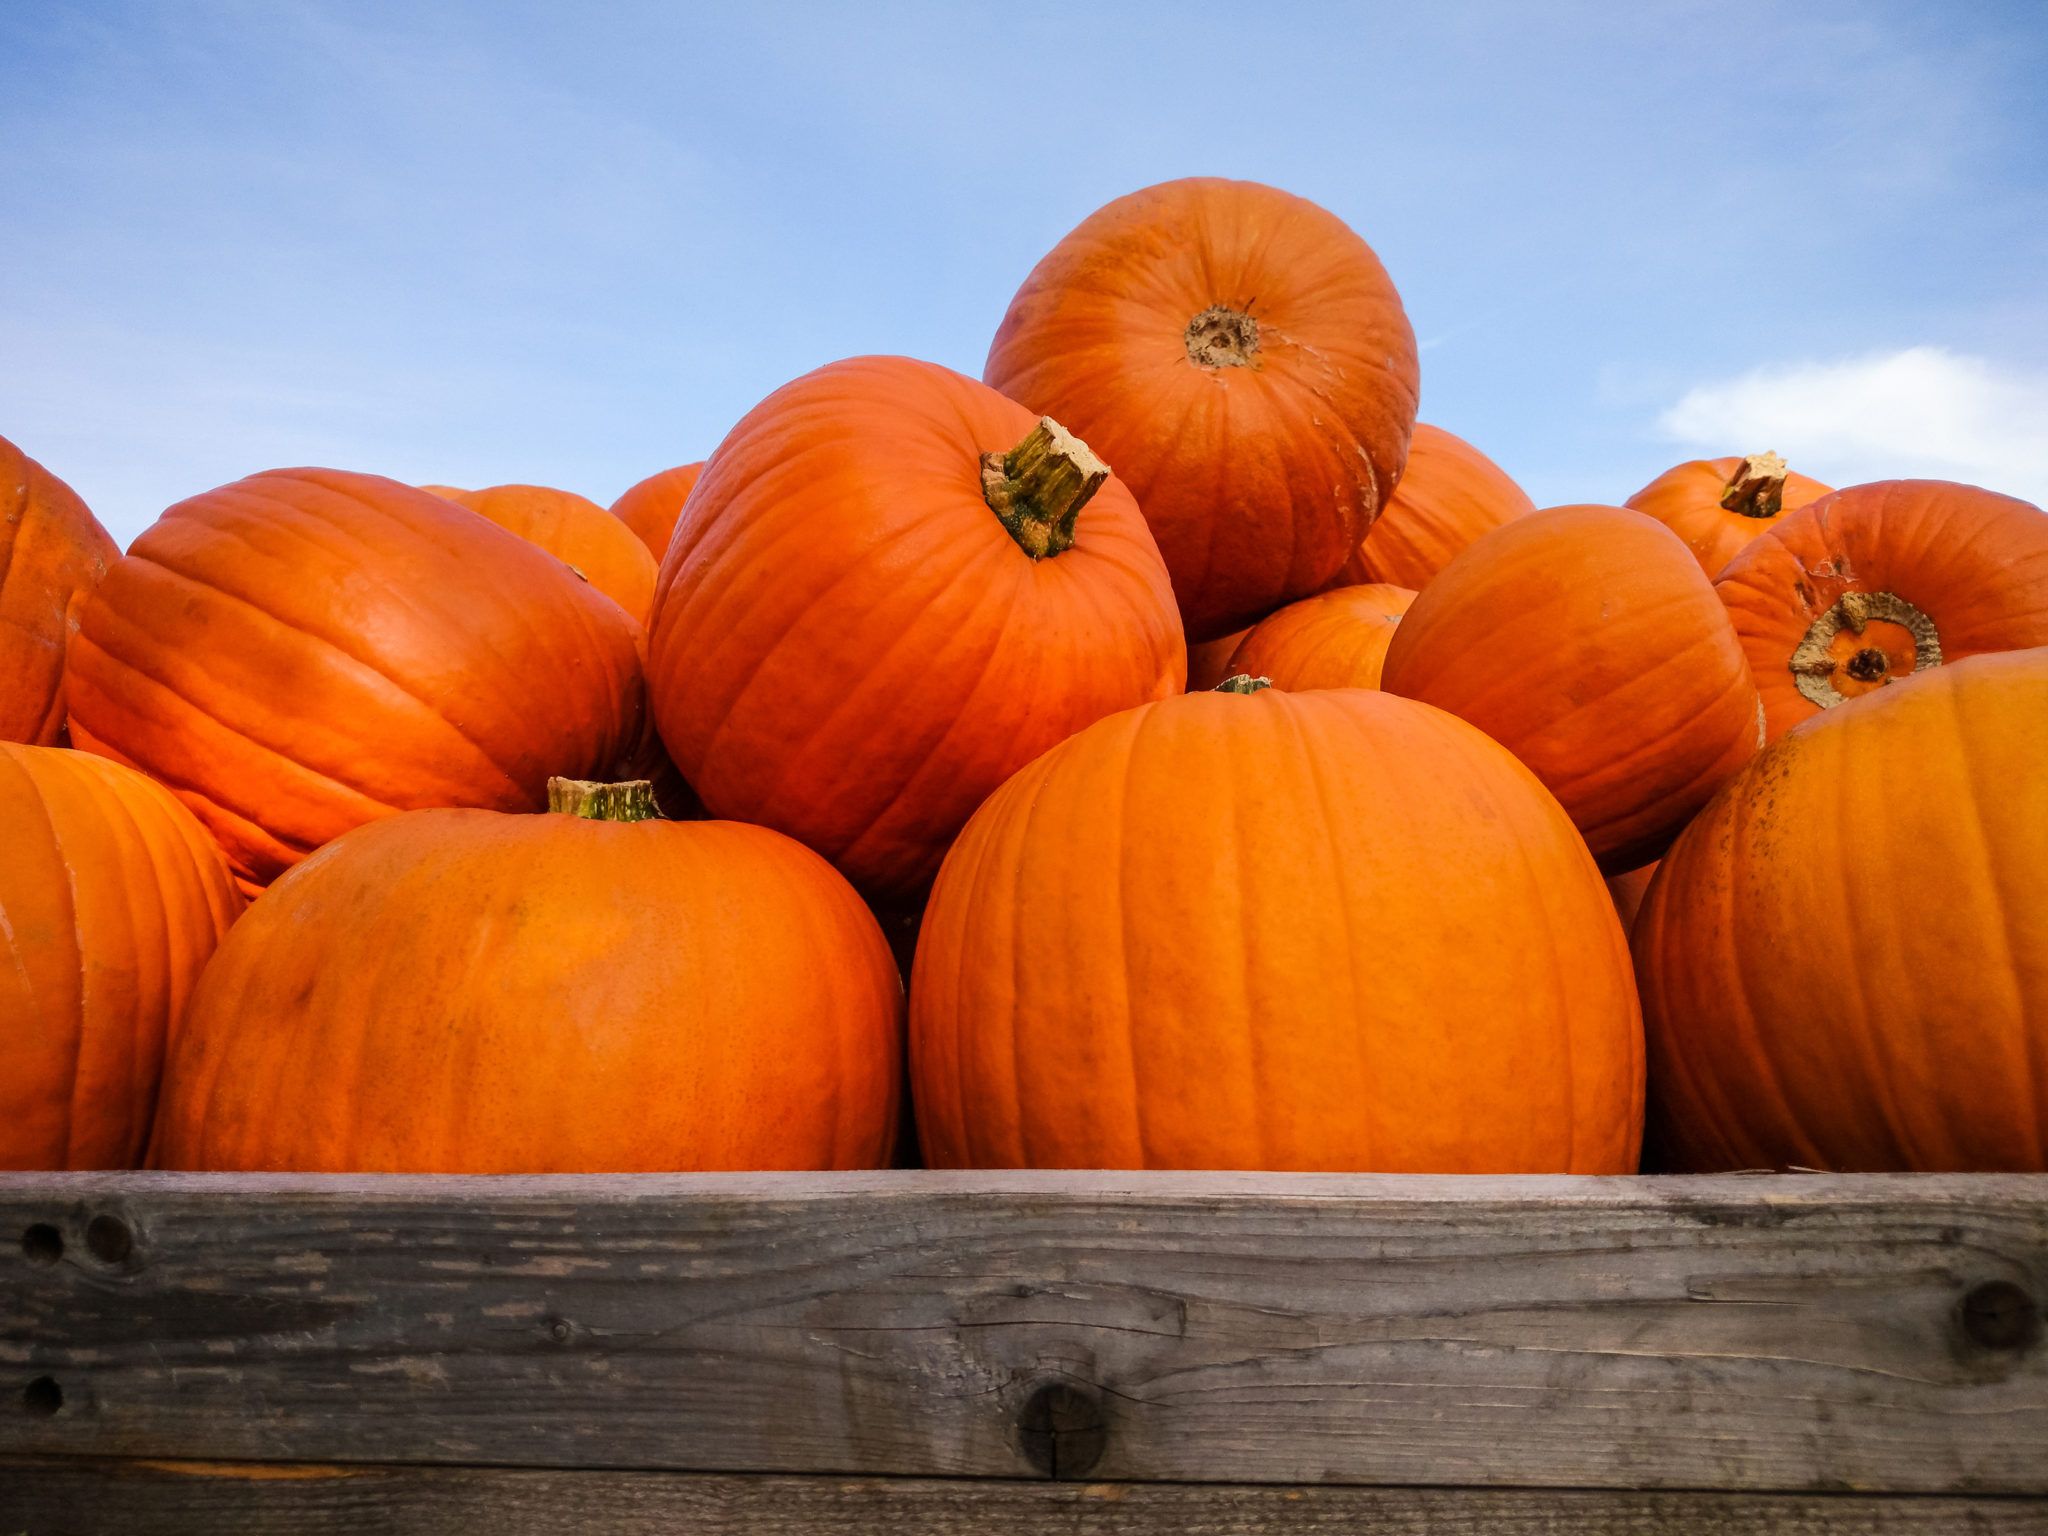 Only one more month until this Kerry Pumpkin Farm is open for harvest